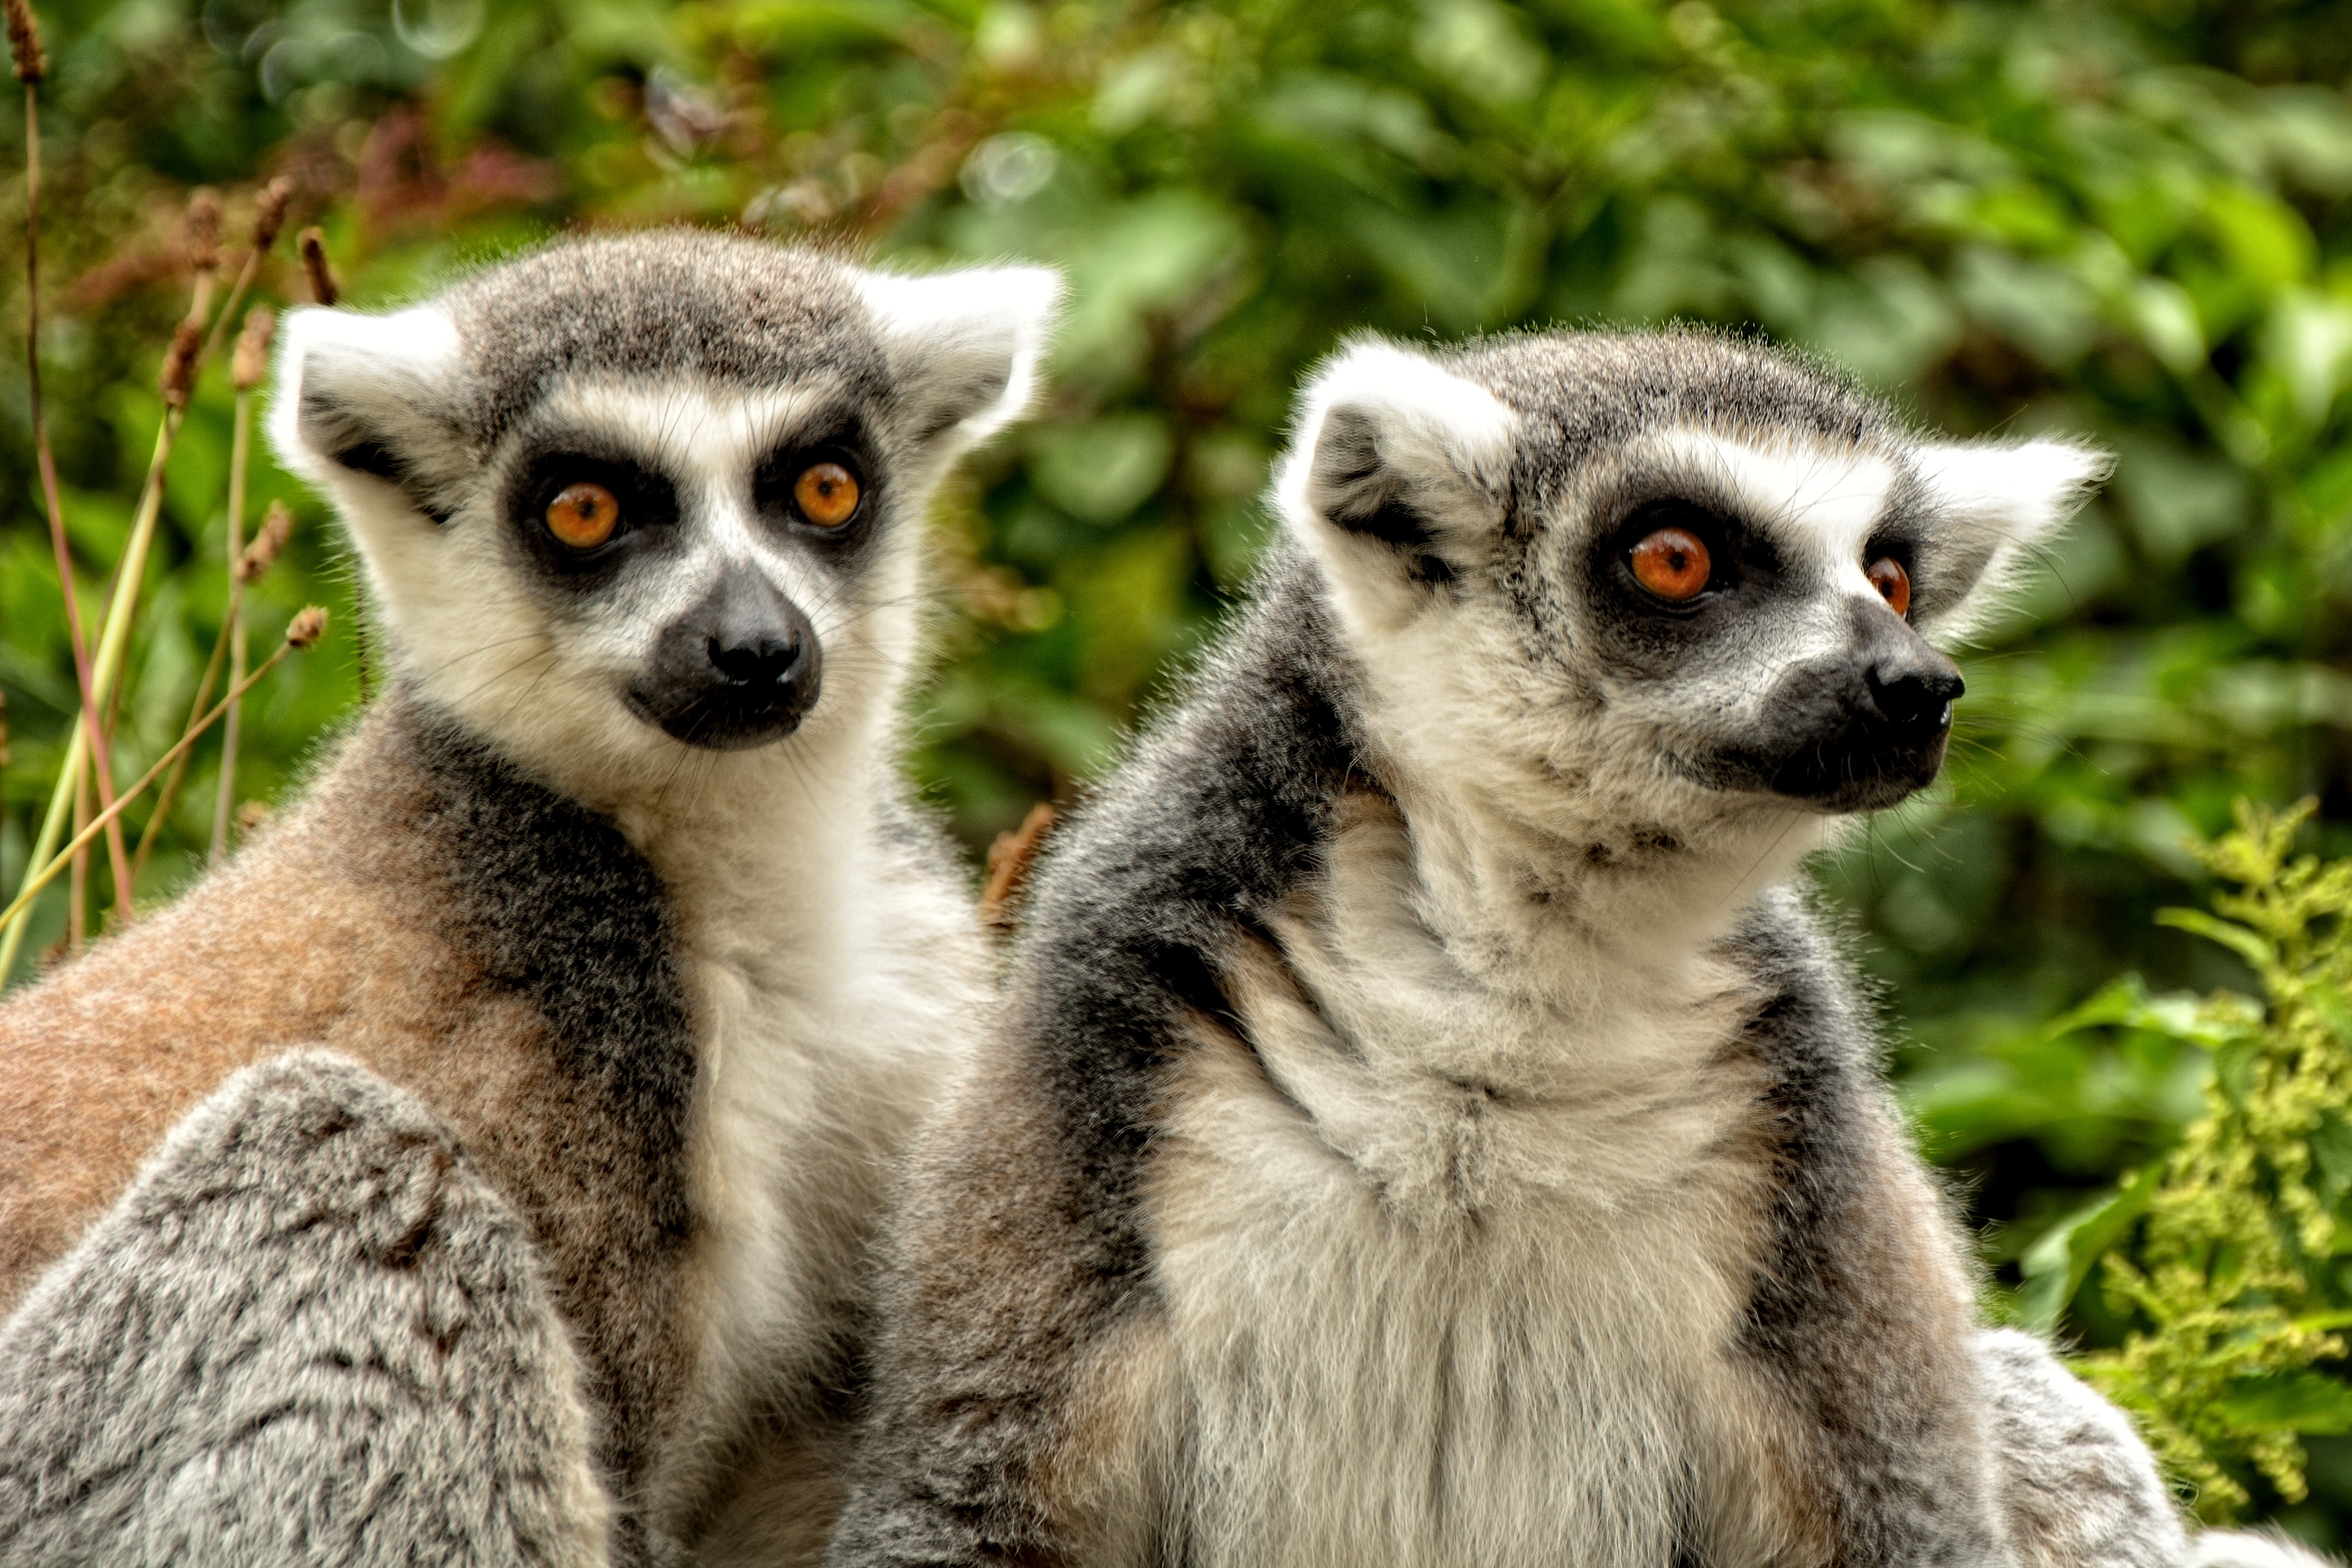 two grey and brown ring-tailed lemurs